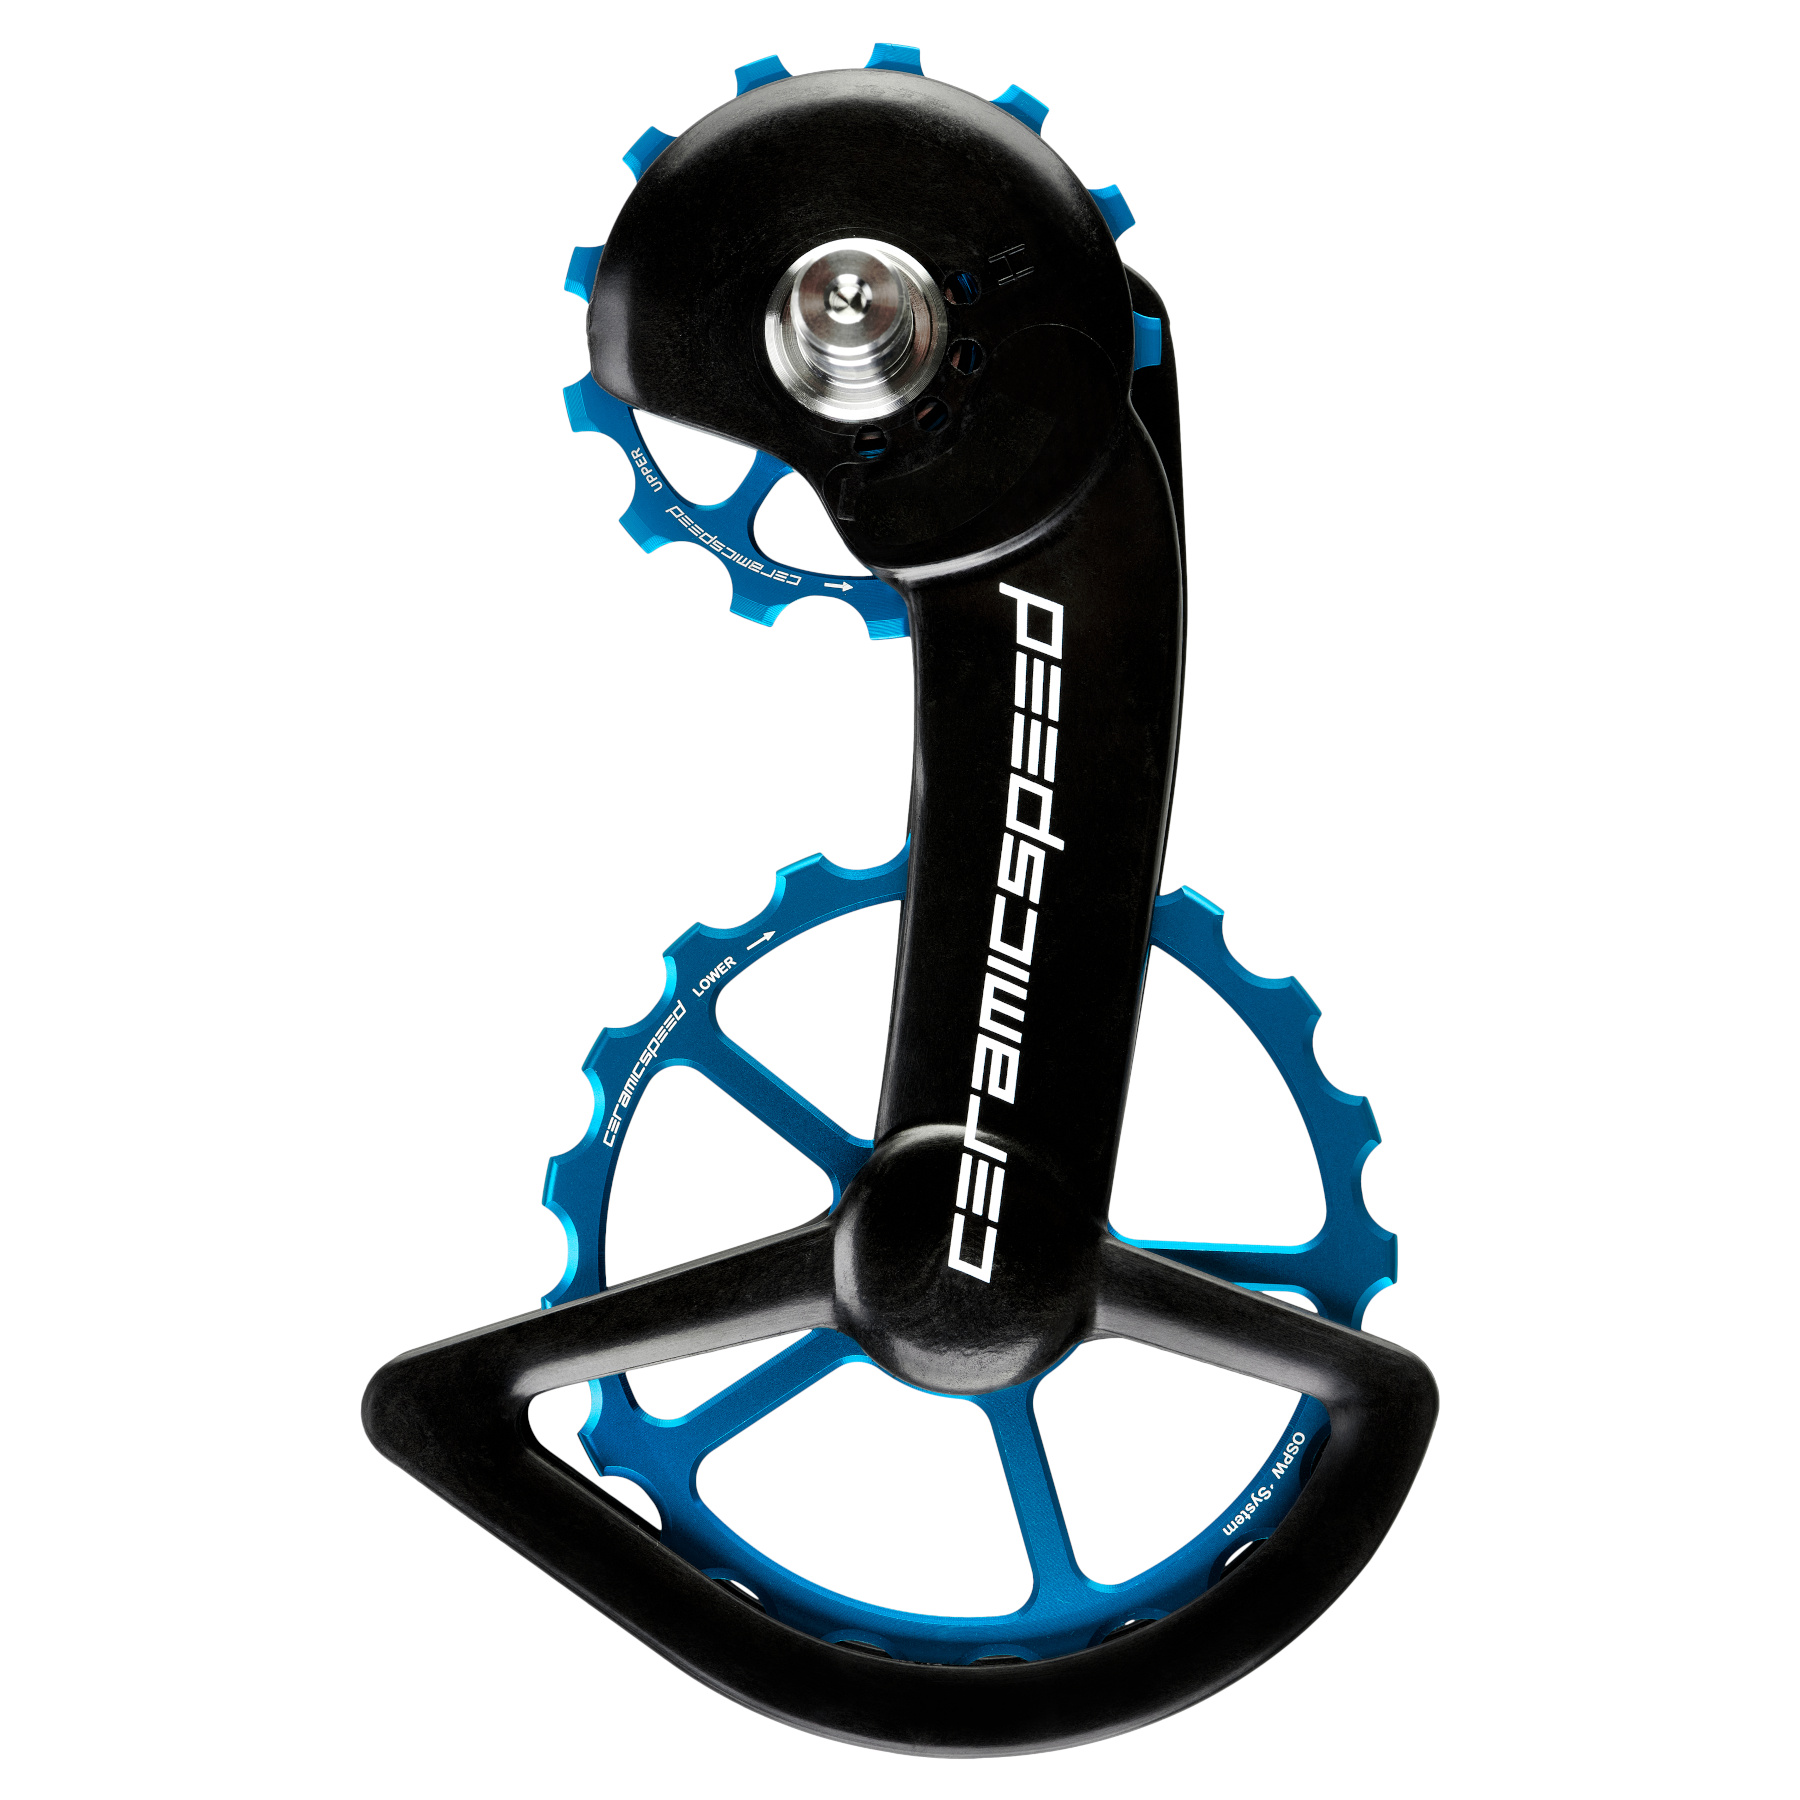 Picture of CeramicSpeed OSPW Derailleur Pulley System - for Shimano R9100/R8000 (11s) | 13/19 Teeth - blue